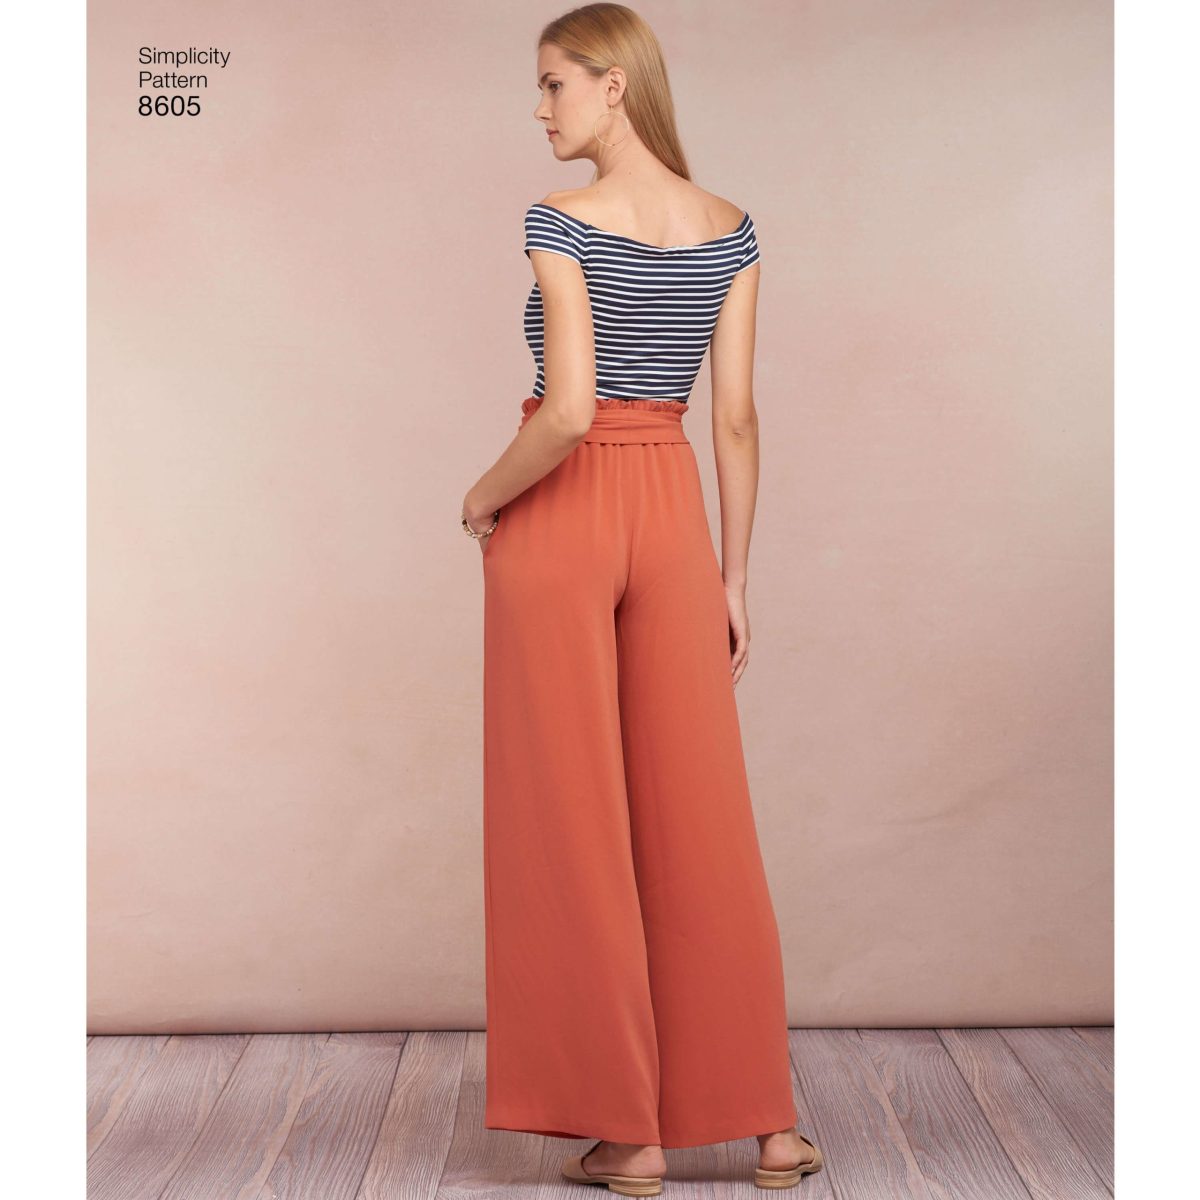 Simplicity Sewing Pattern 8605 Misses' Pull on Skirt and Trousers